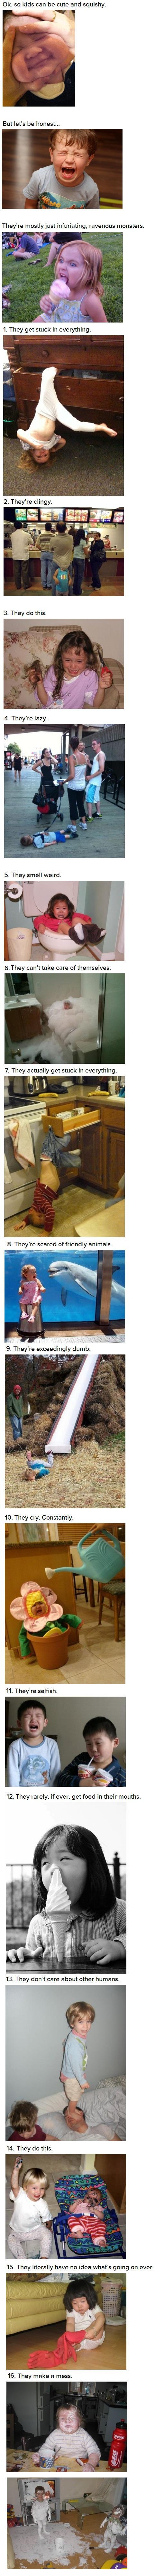 16 Reasons Why Kids Are Actually The Worst -   Misc